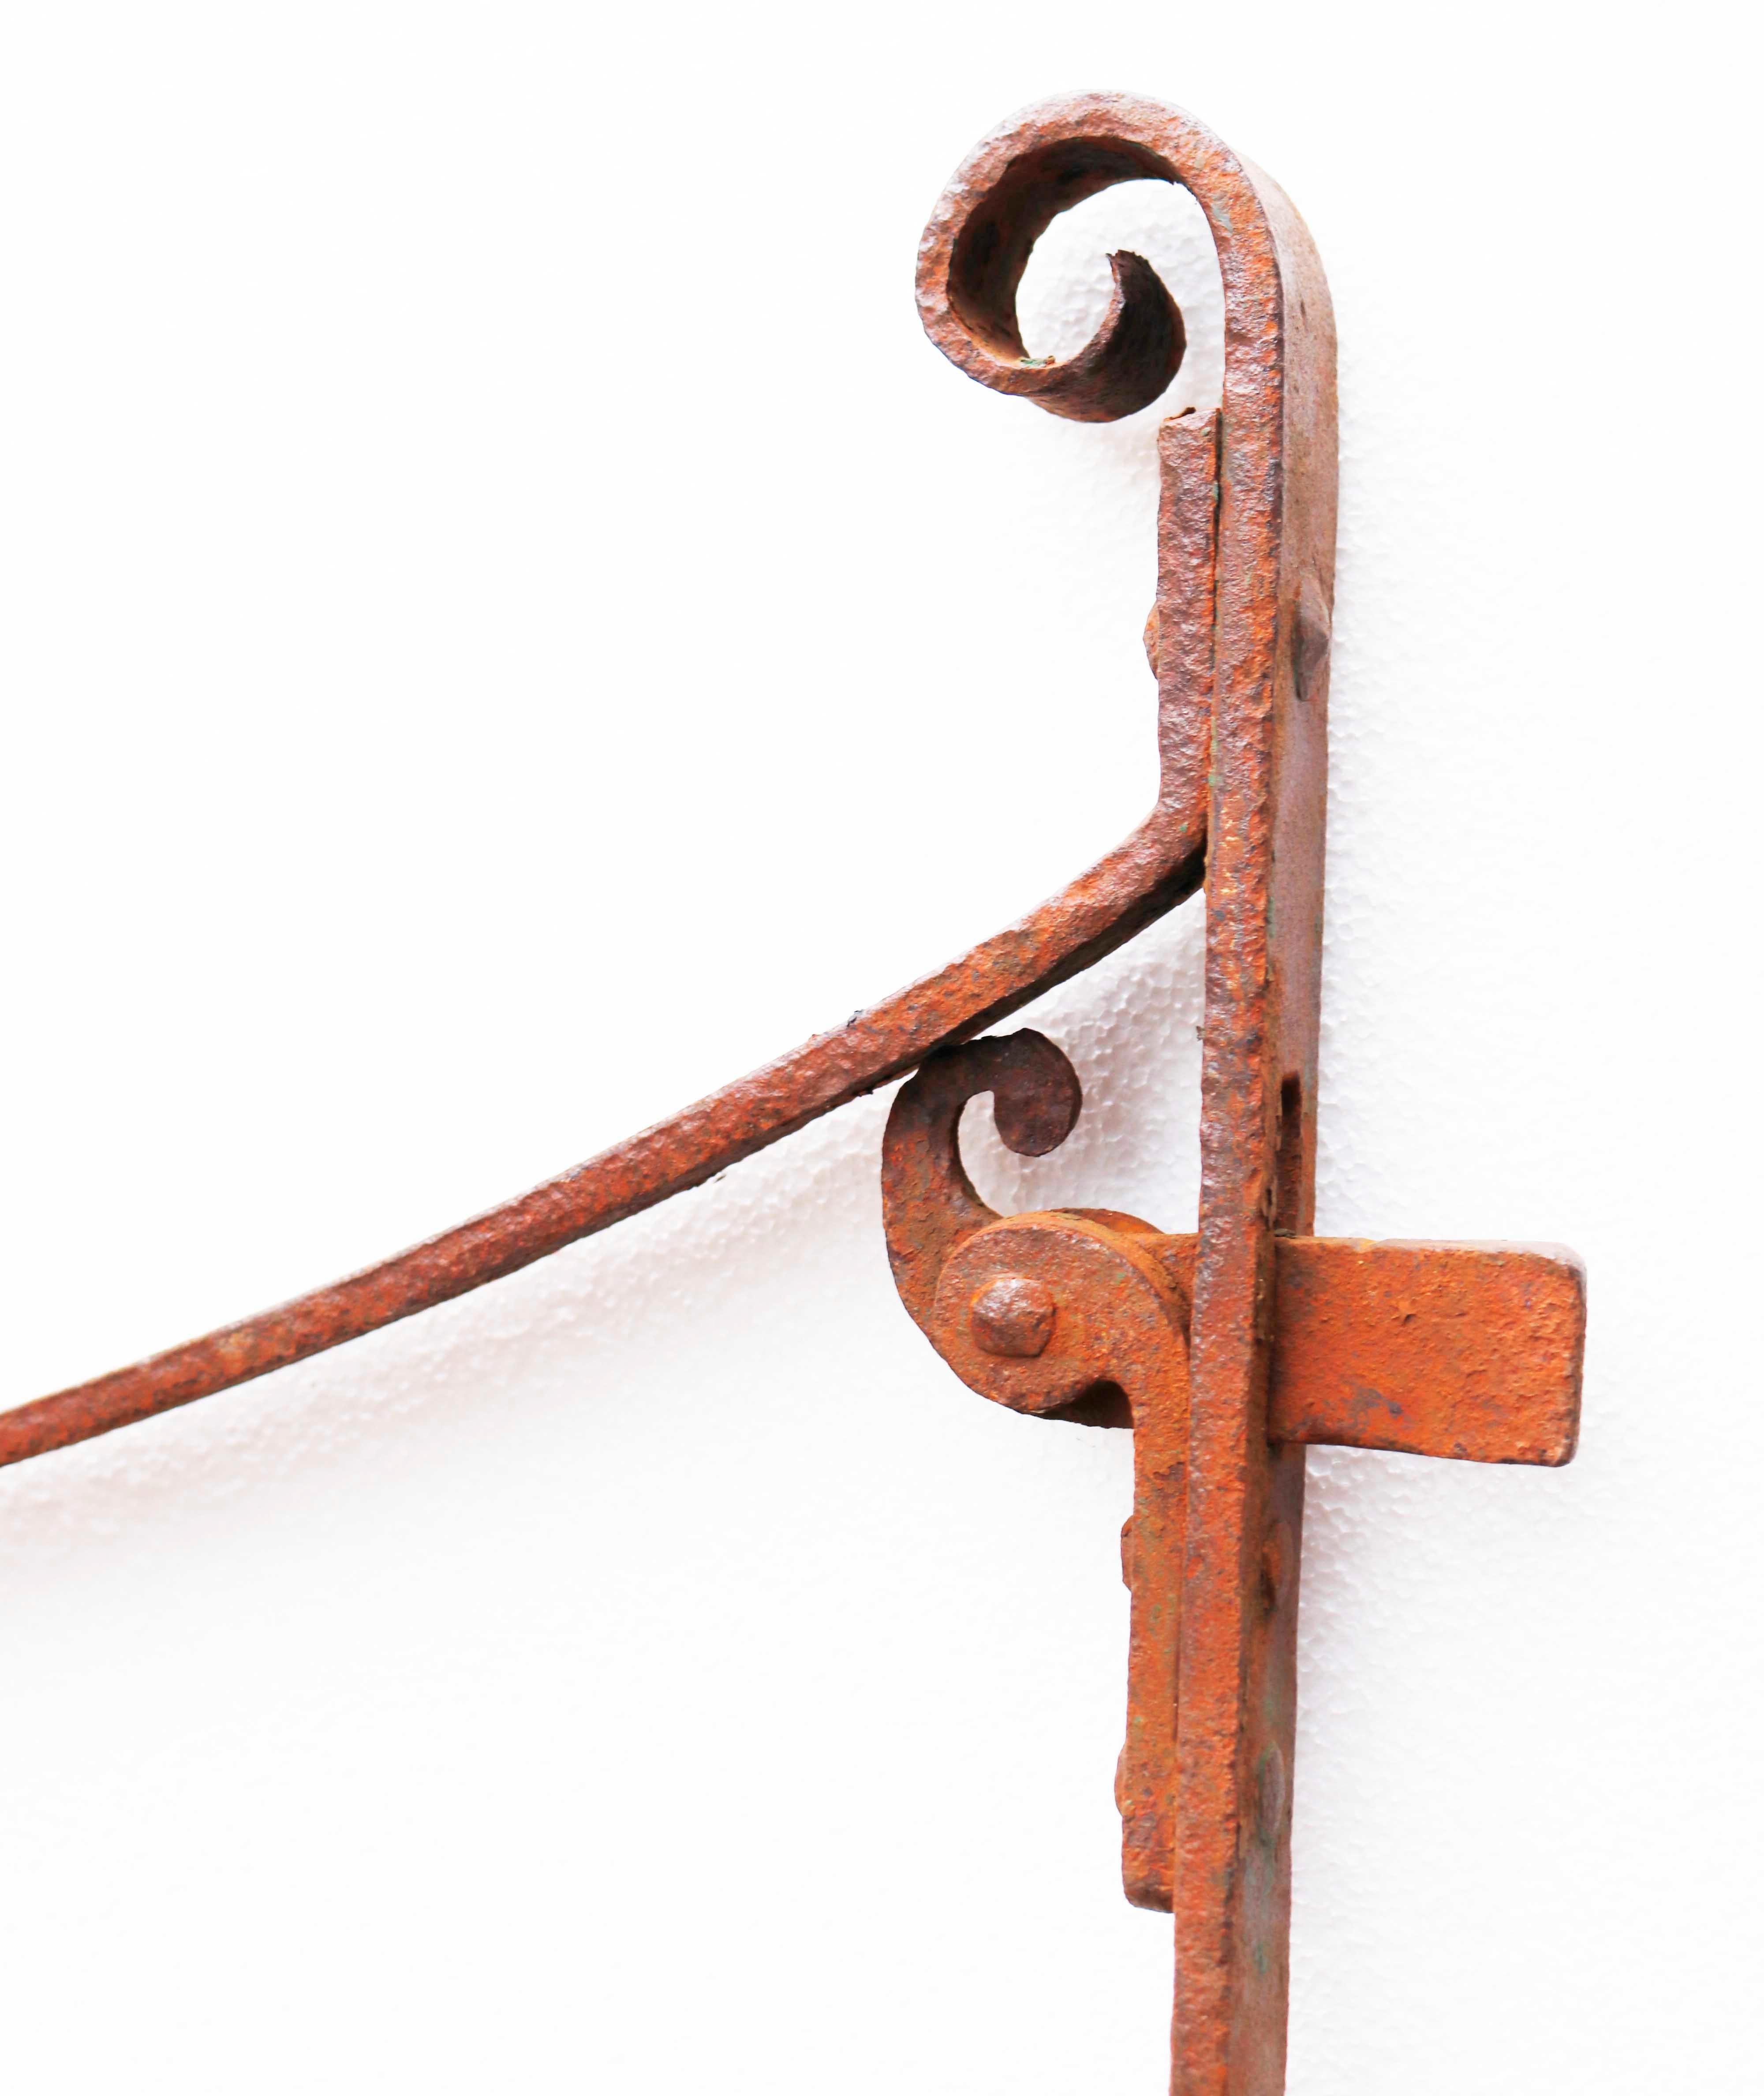 Early 19th Century Garden Gate. A Georgian style wrought iron garden gate, made of strapwork with a scrolled top.

What is Wrought Iron?

Wrought iron is a type of refined, low carbon iron that is smelted and worked on with tools. The term wrought